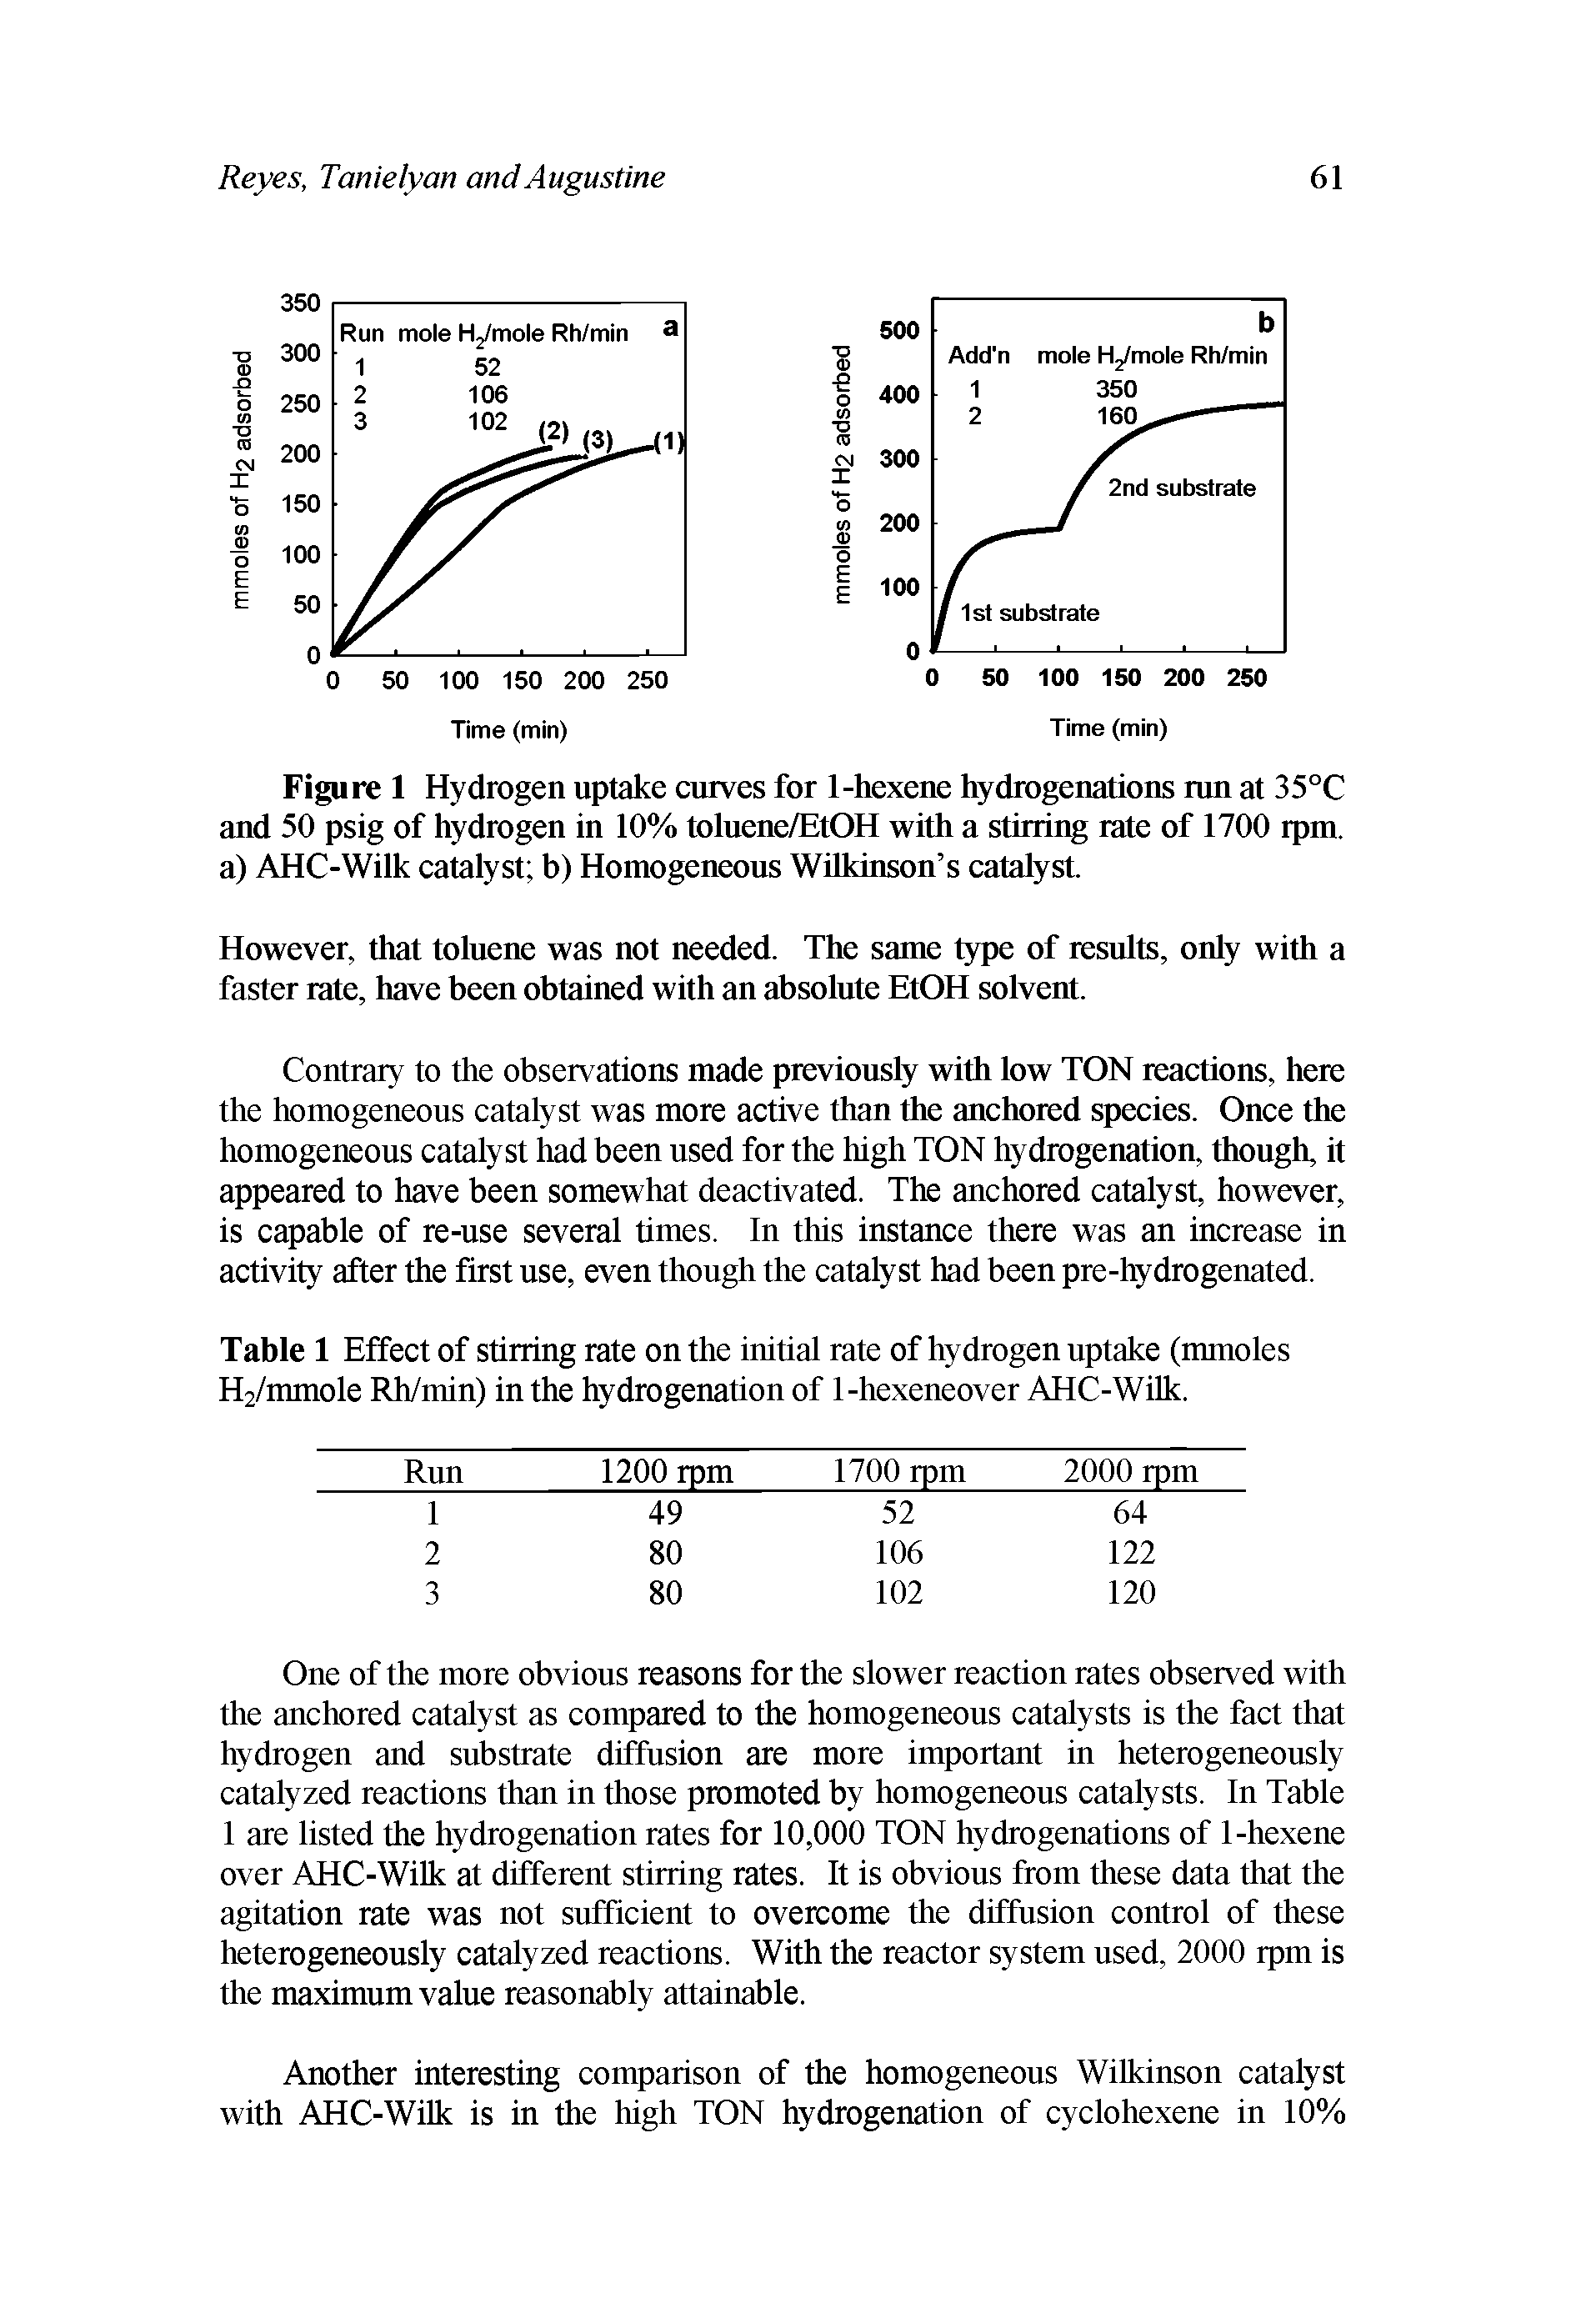 Table 1 Effect of stirring rate on the initial rate of hydrogen uptake (mmoles H2/mmole Rh/min) in the hydrogenation of 1-hexeneover AHC-Wilk.